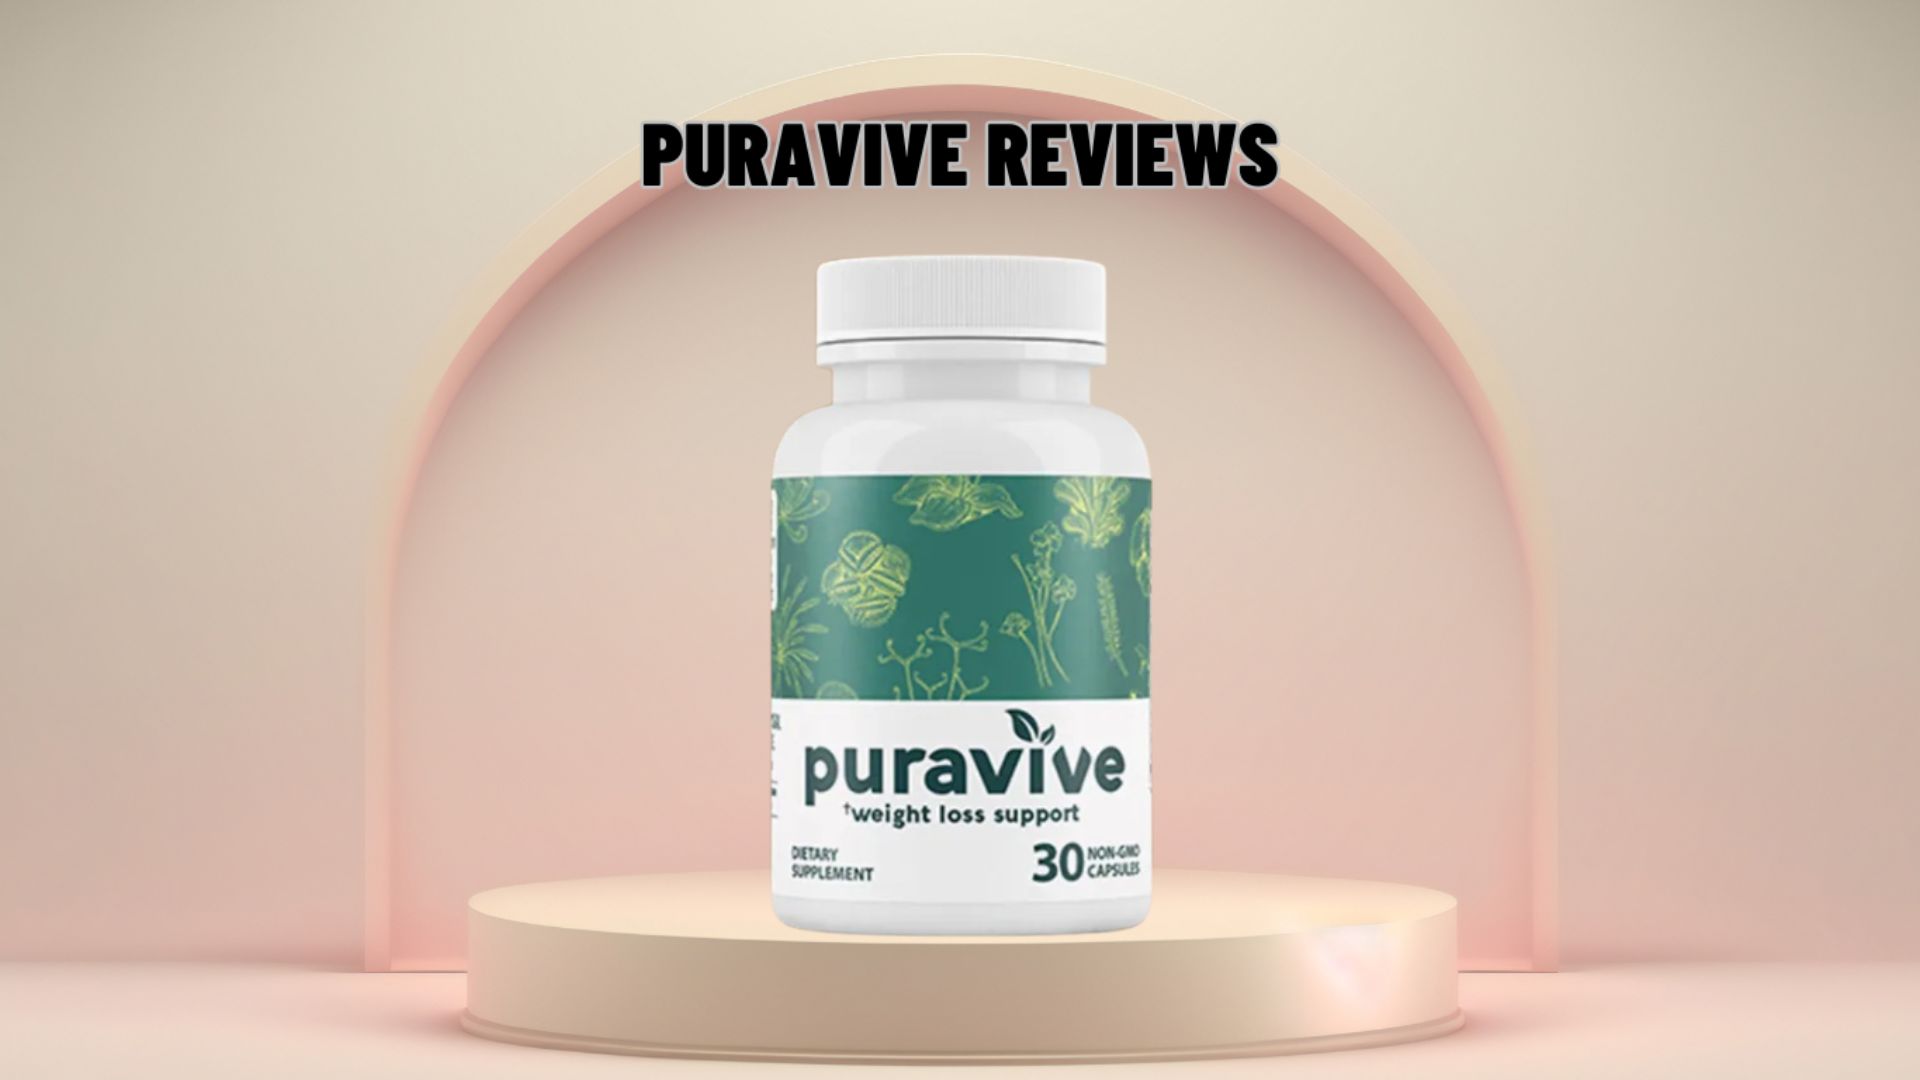 Use of Puravive